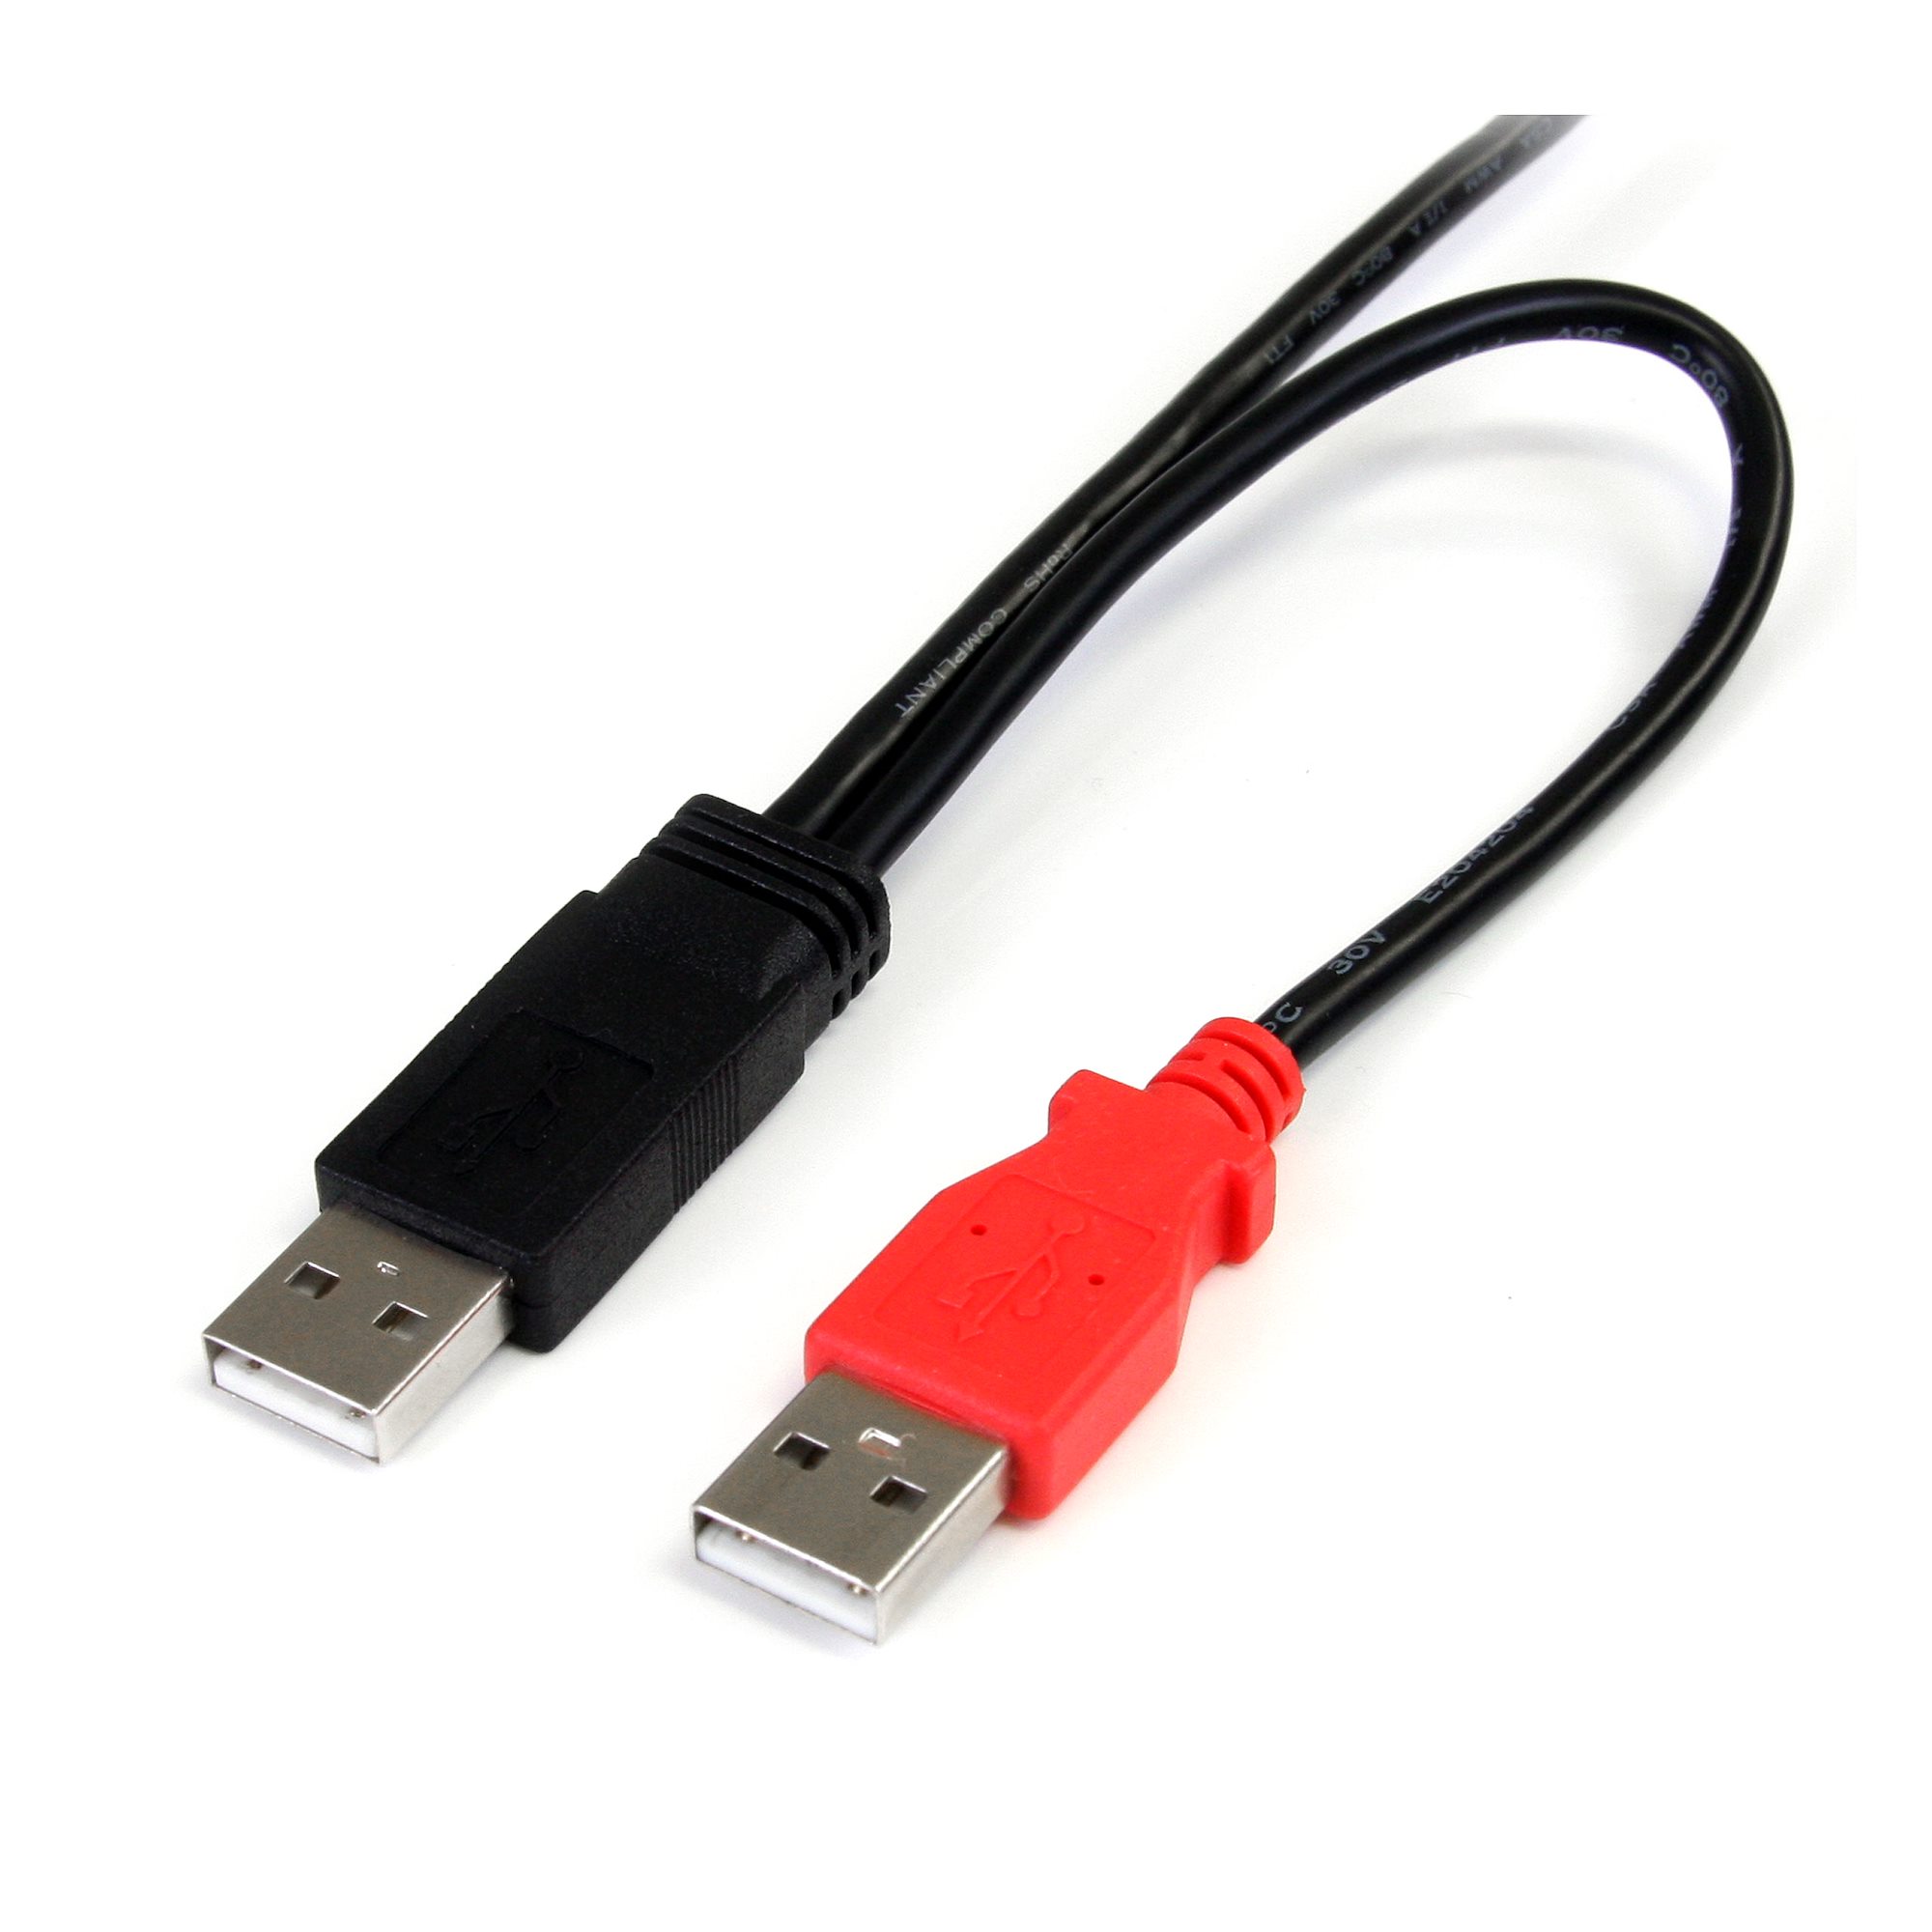 Leia symmetri Nat sted 1 ft USB Y Cable for External Hard Drive - Micro USB Cables | StarTech.com